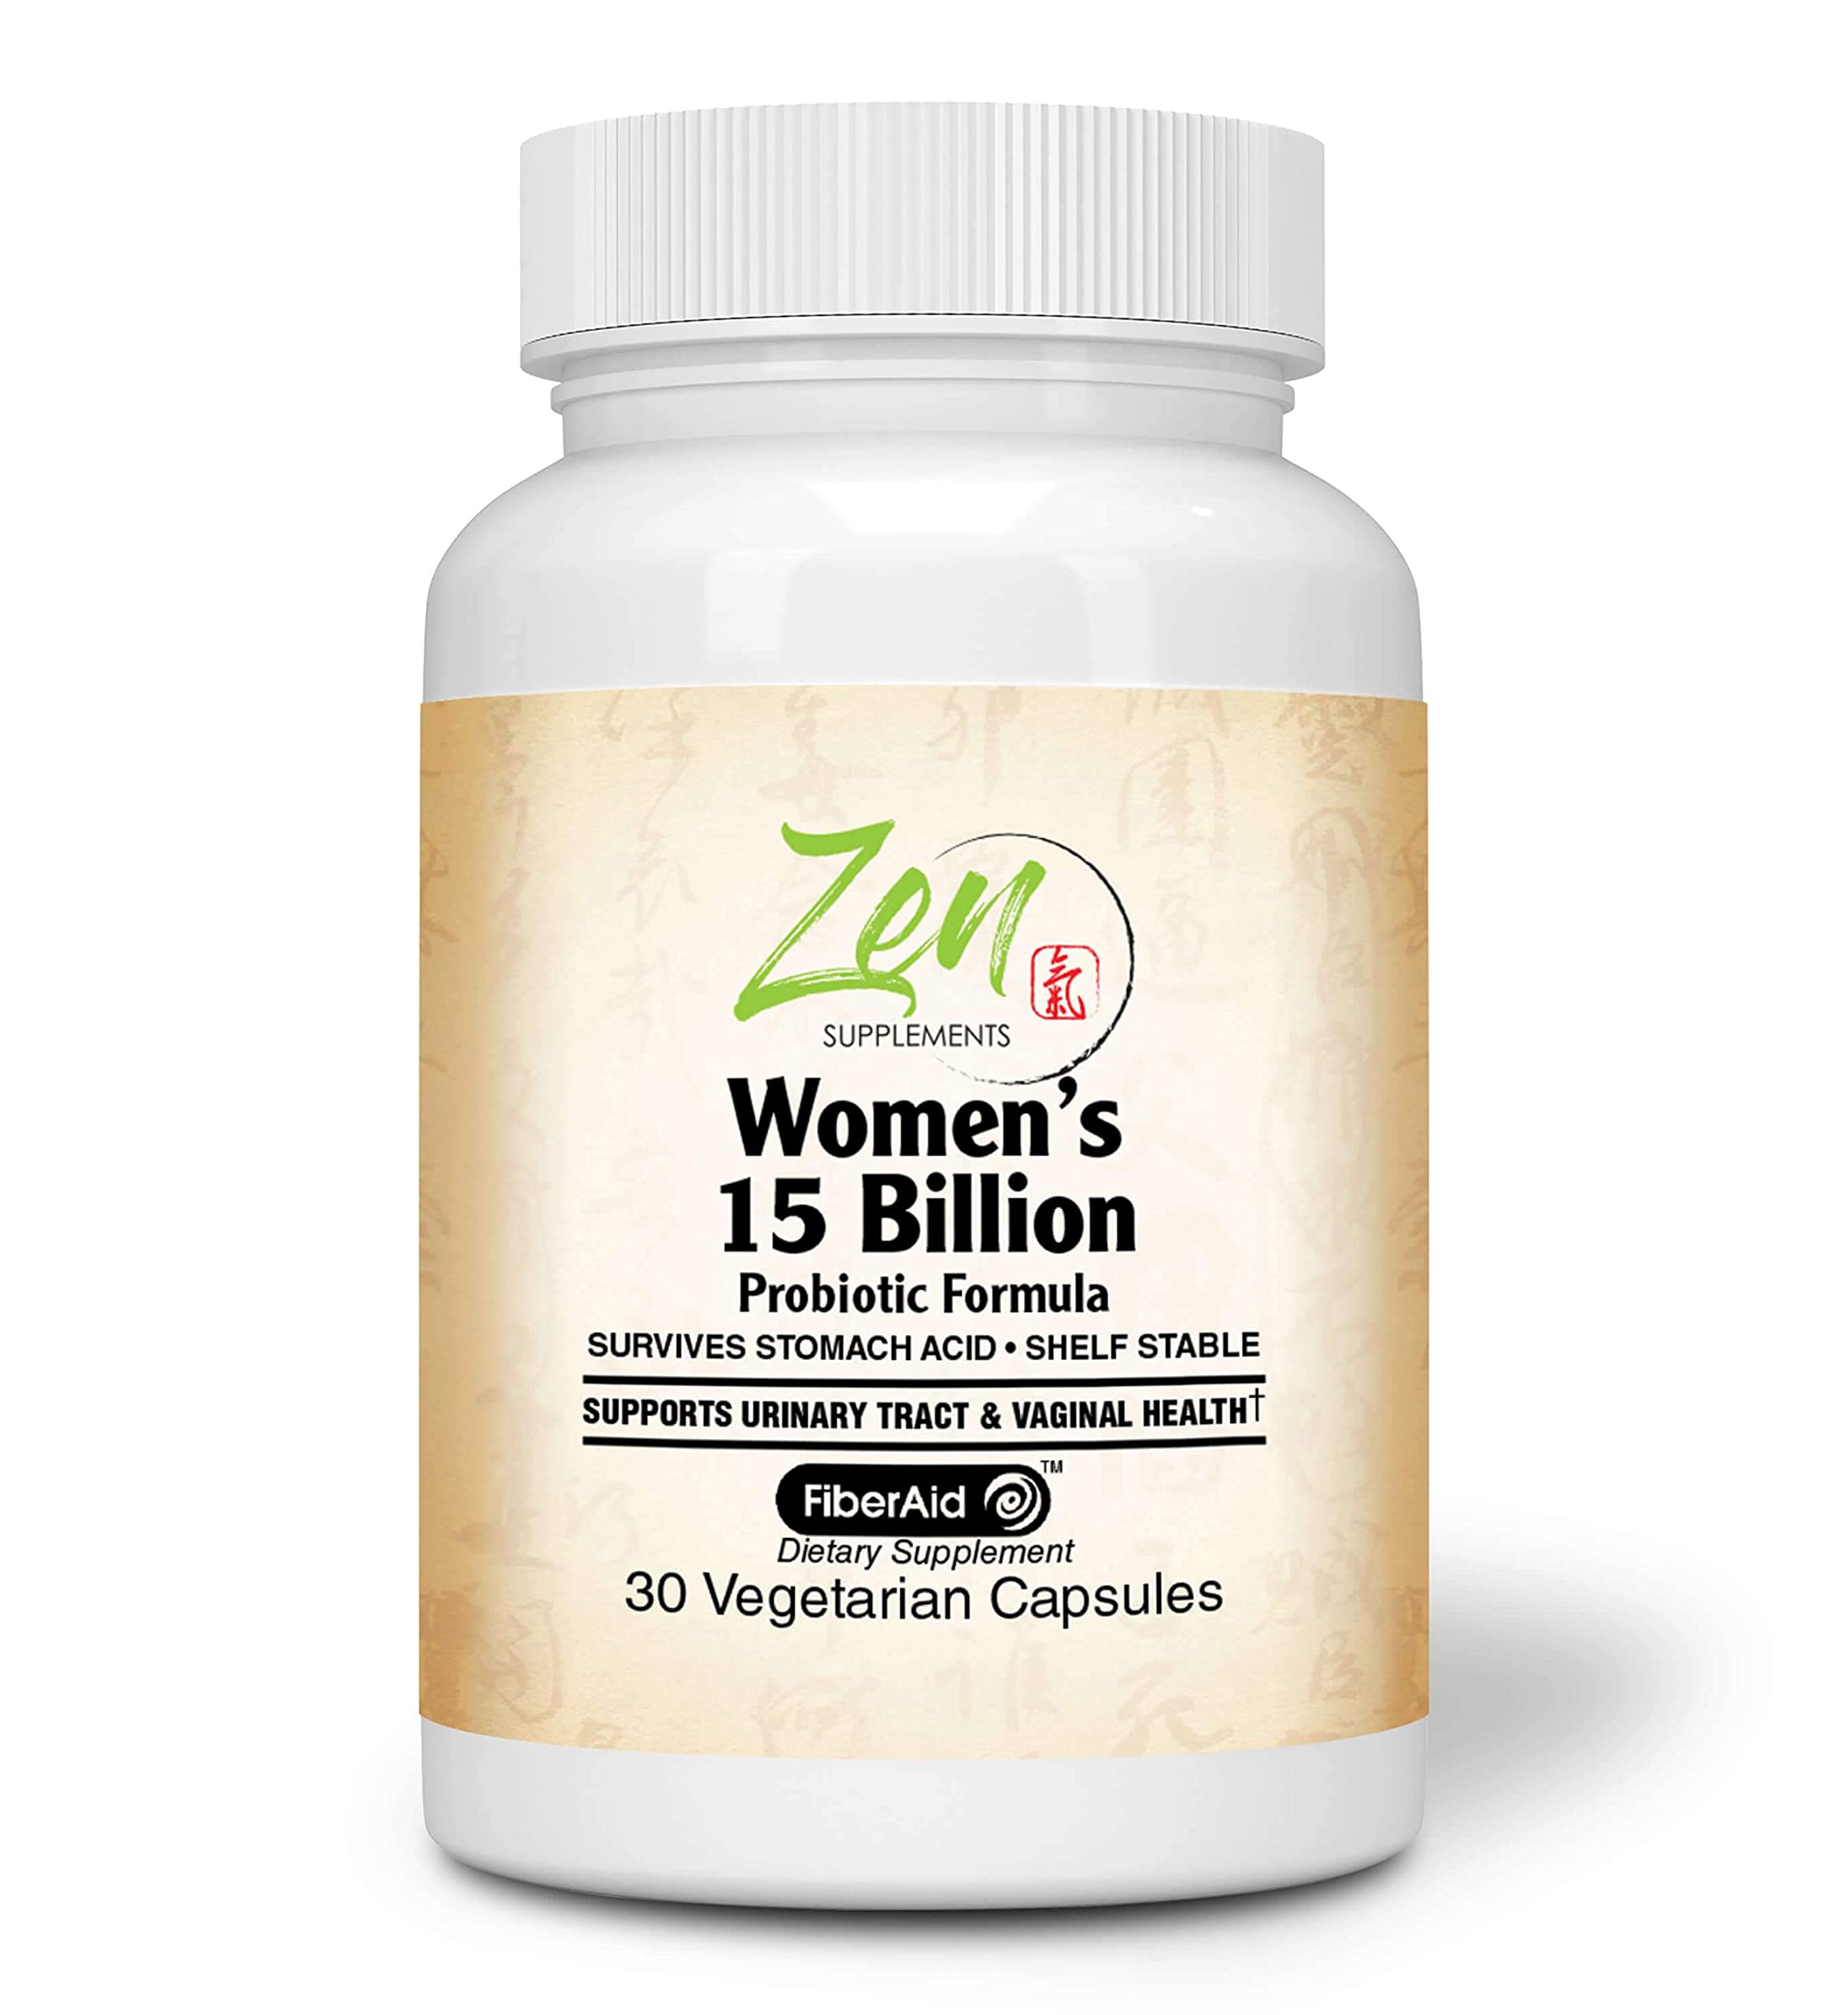 Zen Supplements - Womens 15 Billion Multi-Probiotic - Supports Urinary and Vaginal Health with Lactobacilli & Bifado Blended Strains Survives Stomach Acid, Shelf Stable 30-Vegcaps